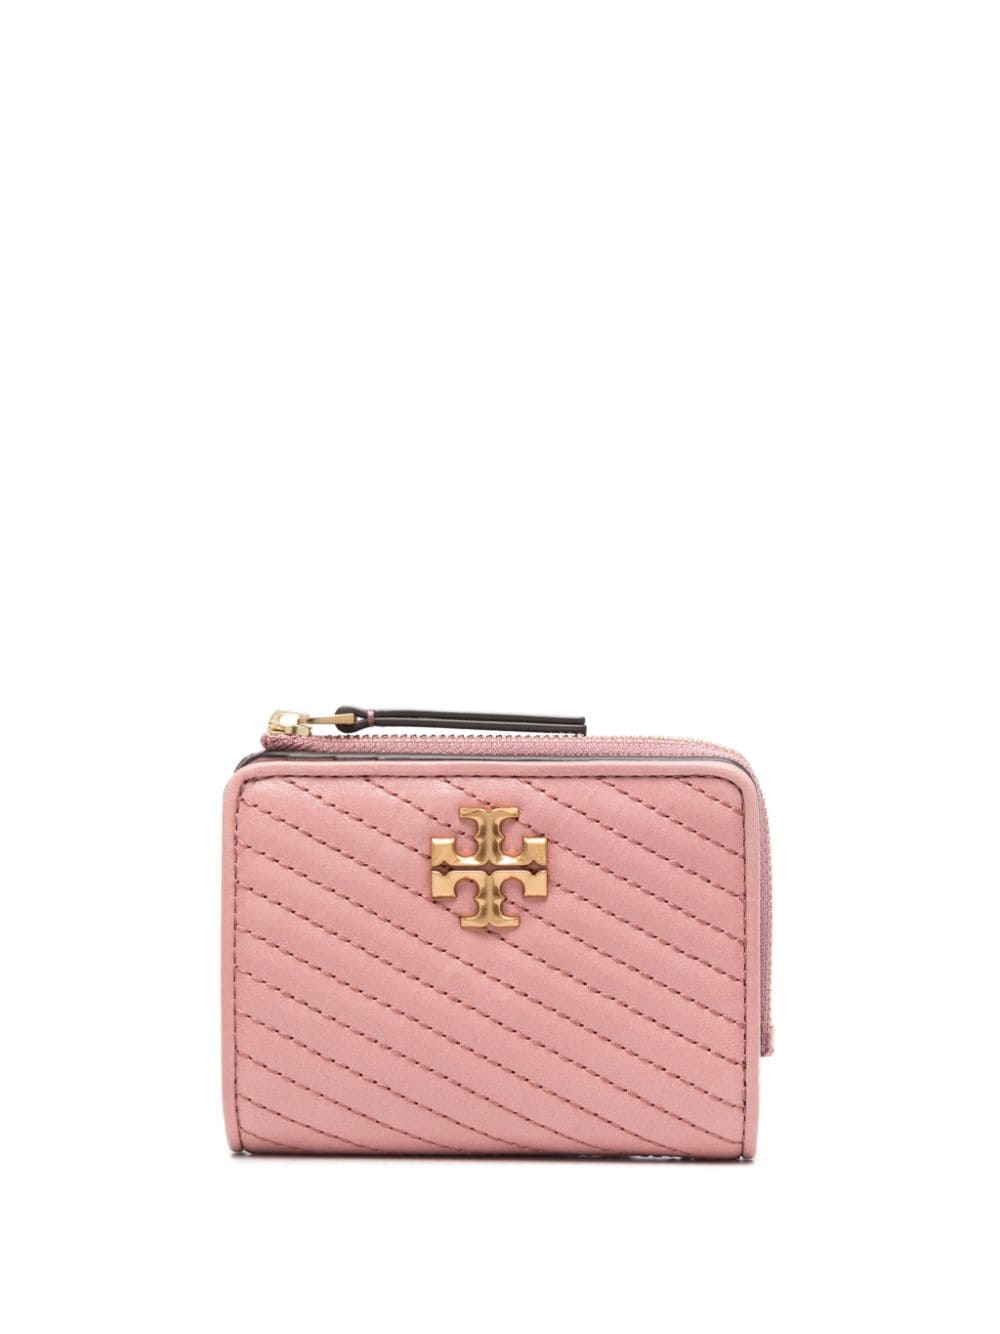 Tory Burch Double T Quilted Wallet In Pink